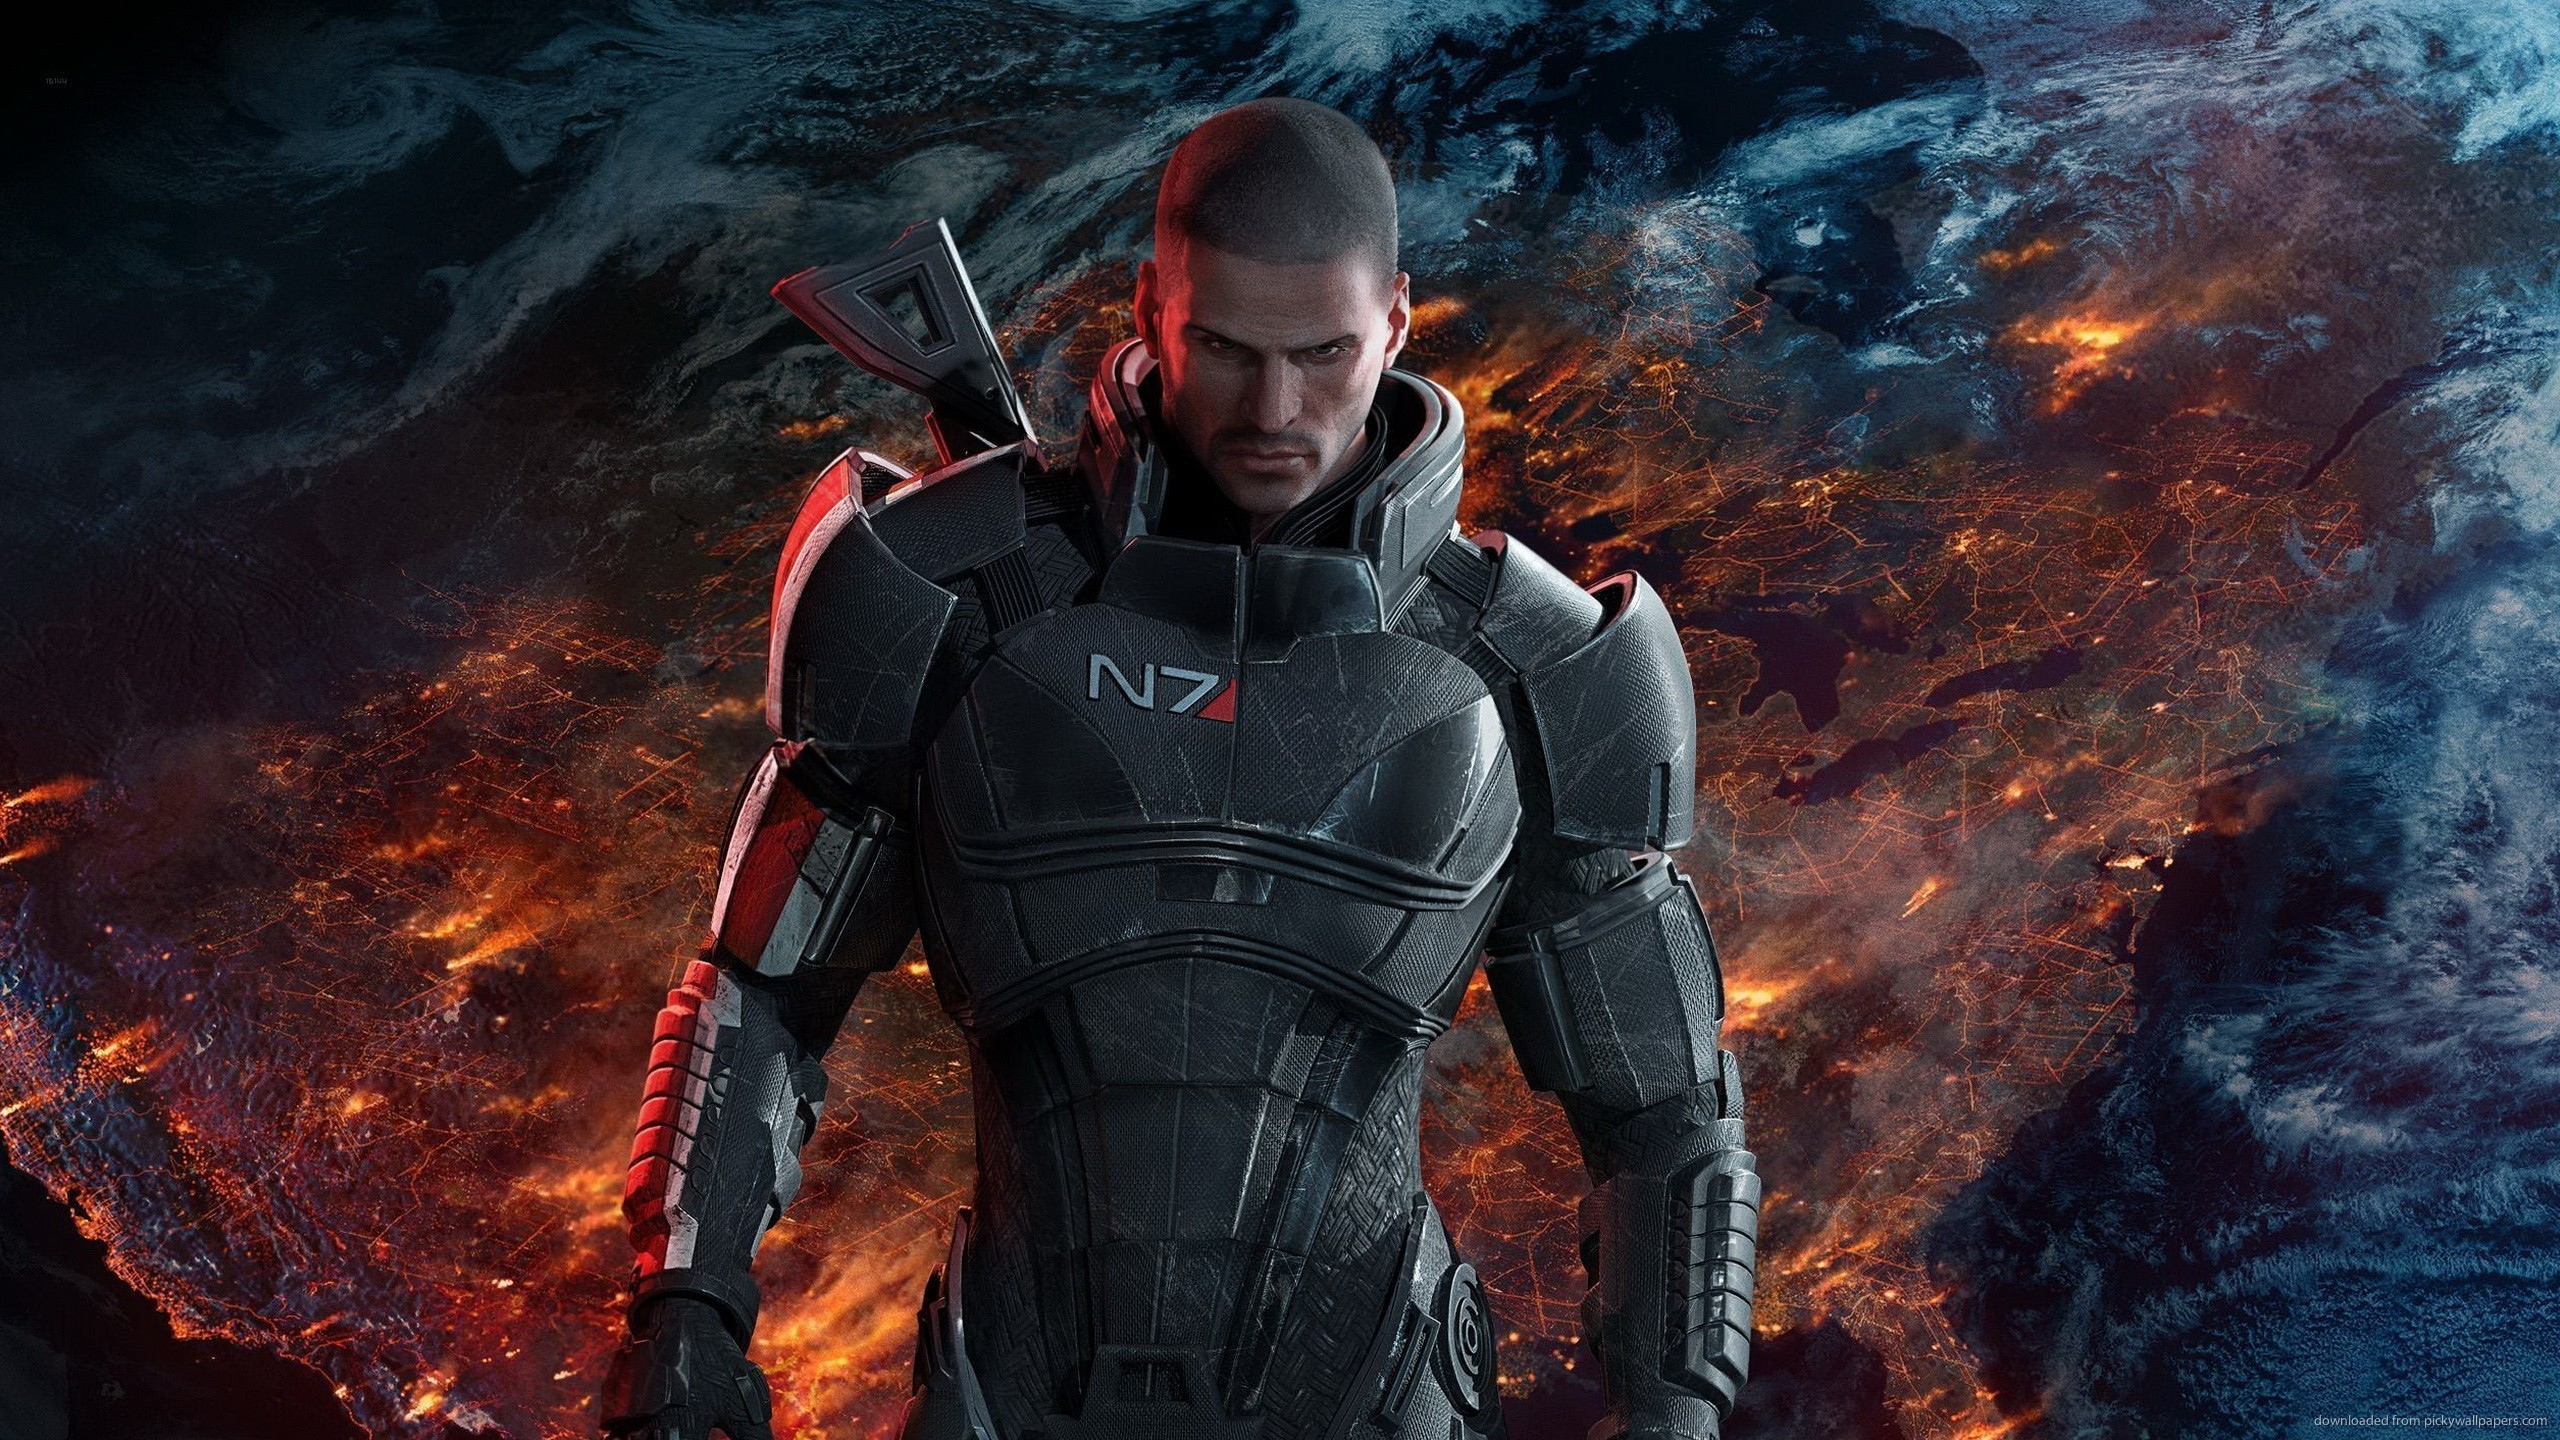 mass effect 2 download size